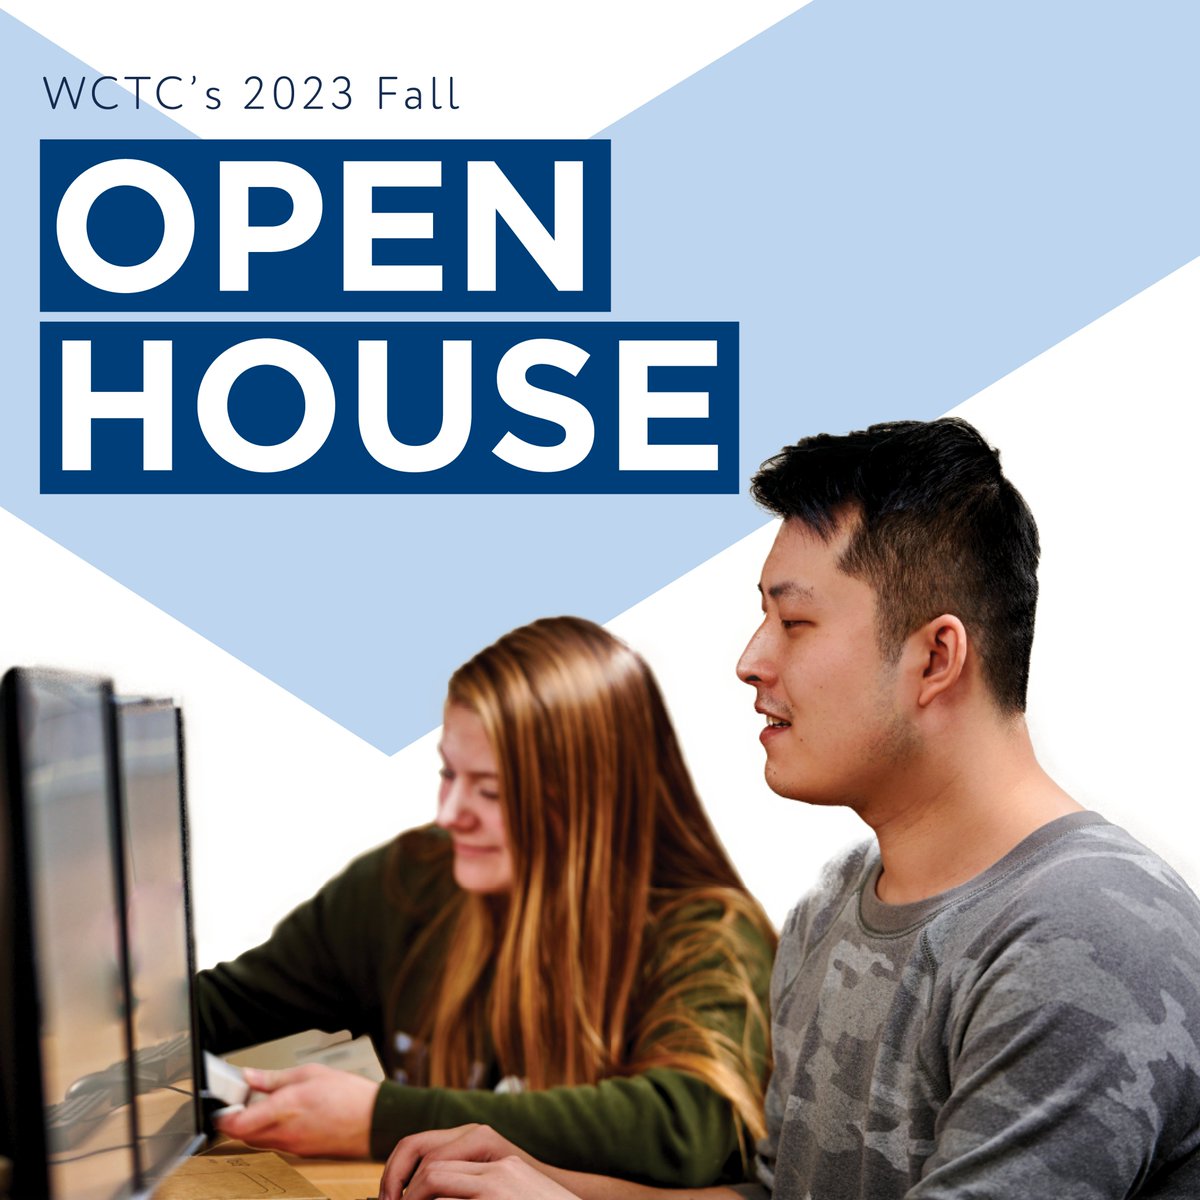 Save the date! We'd love to see you on Thursday, November 2 at our Fall Open House. Join us: wctc.edu/open-house